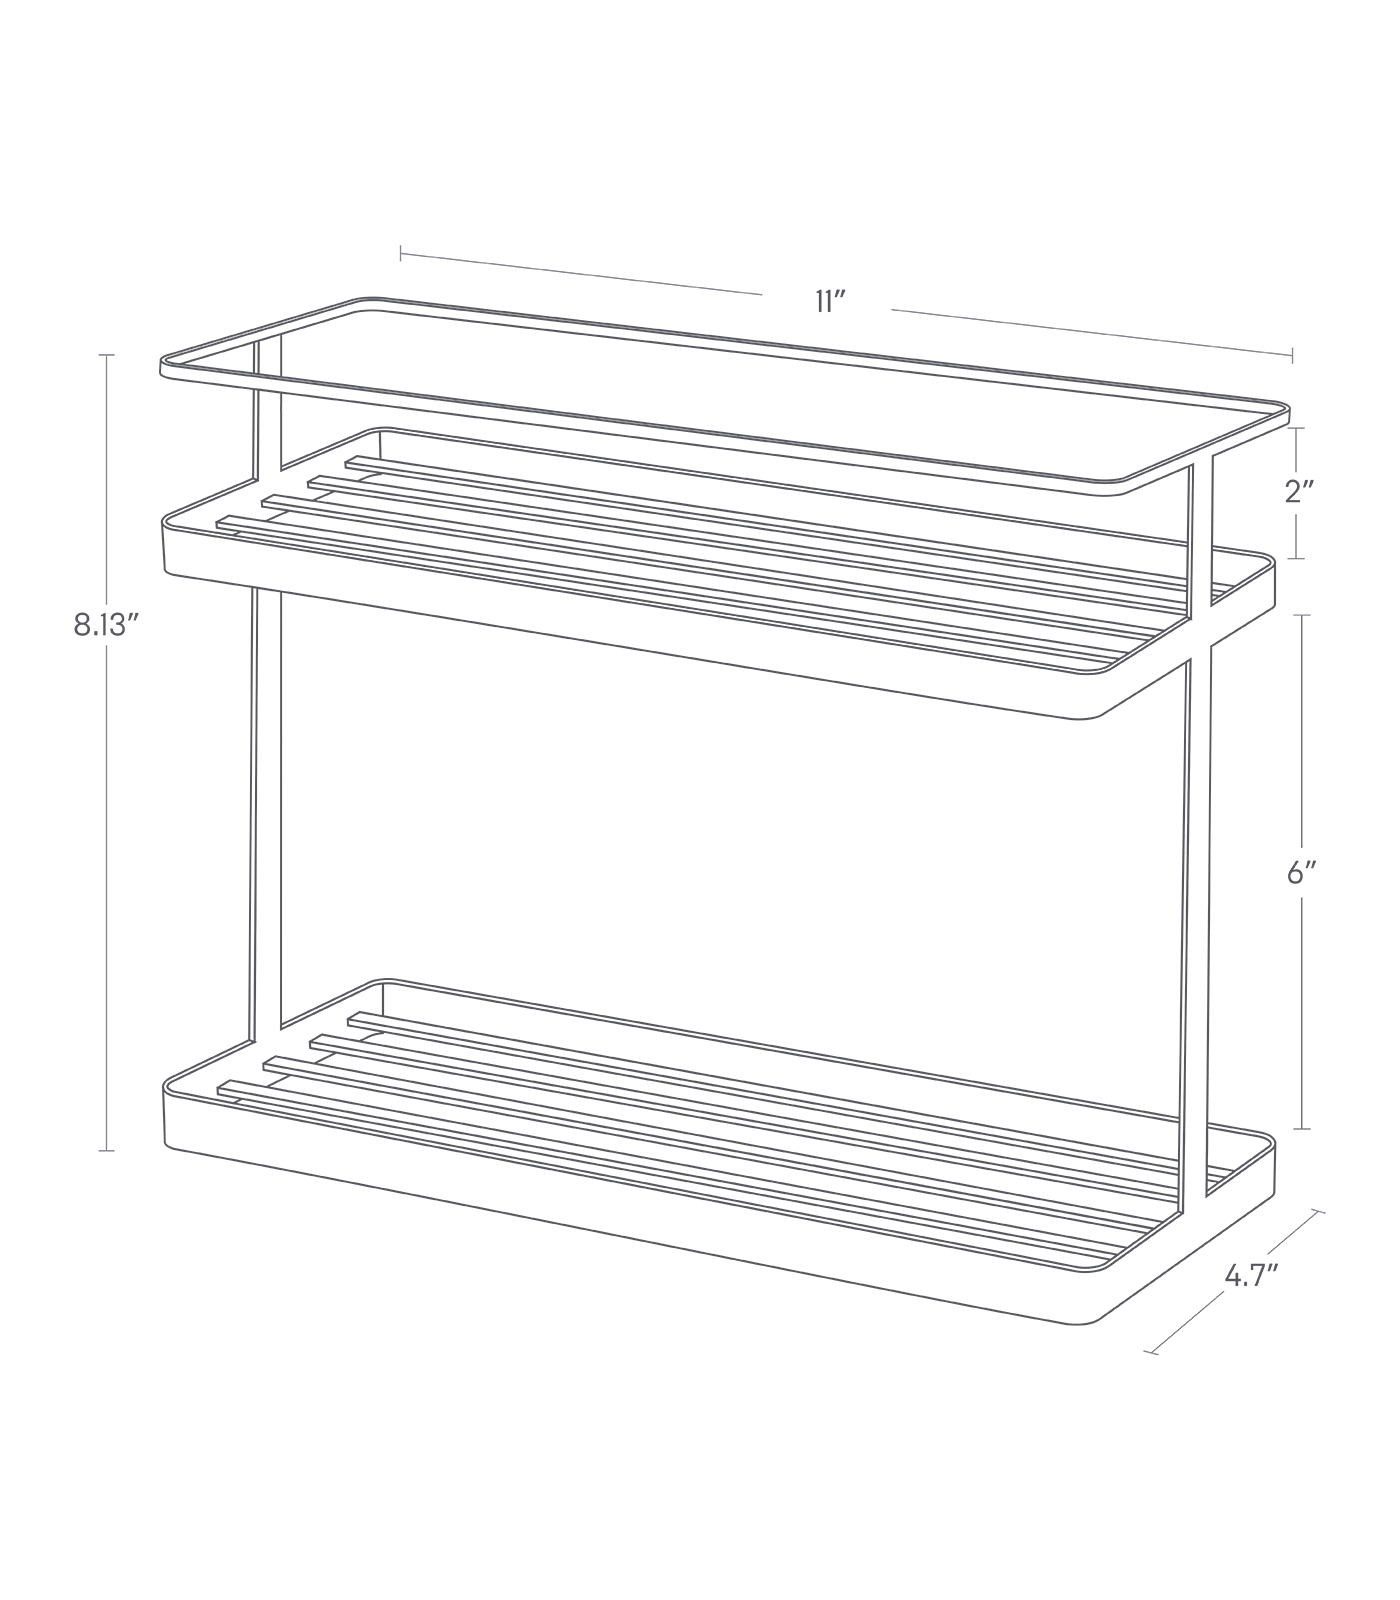 Dimension image for Countertop Organizer Rack on a white background including dimensions  L 4.72 x W 11.02 x H 8.27 inches